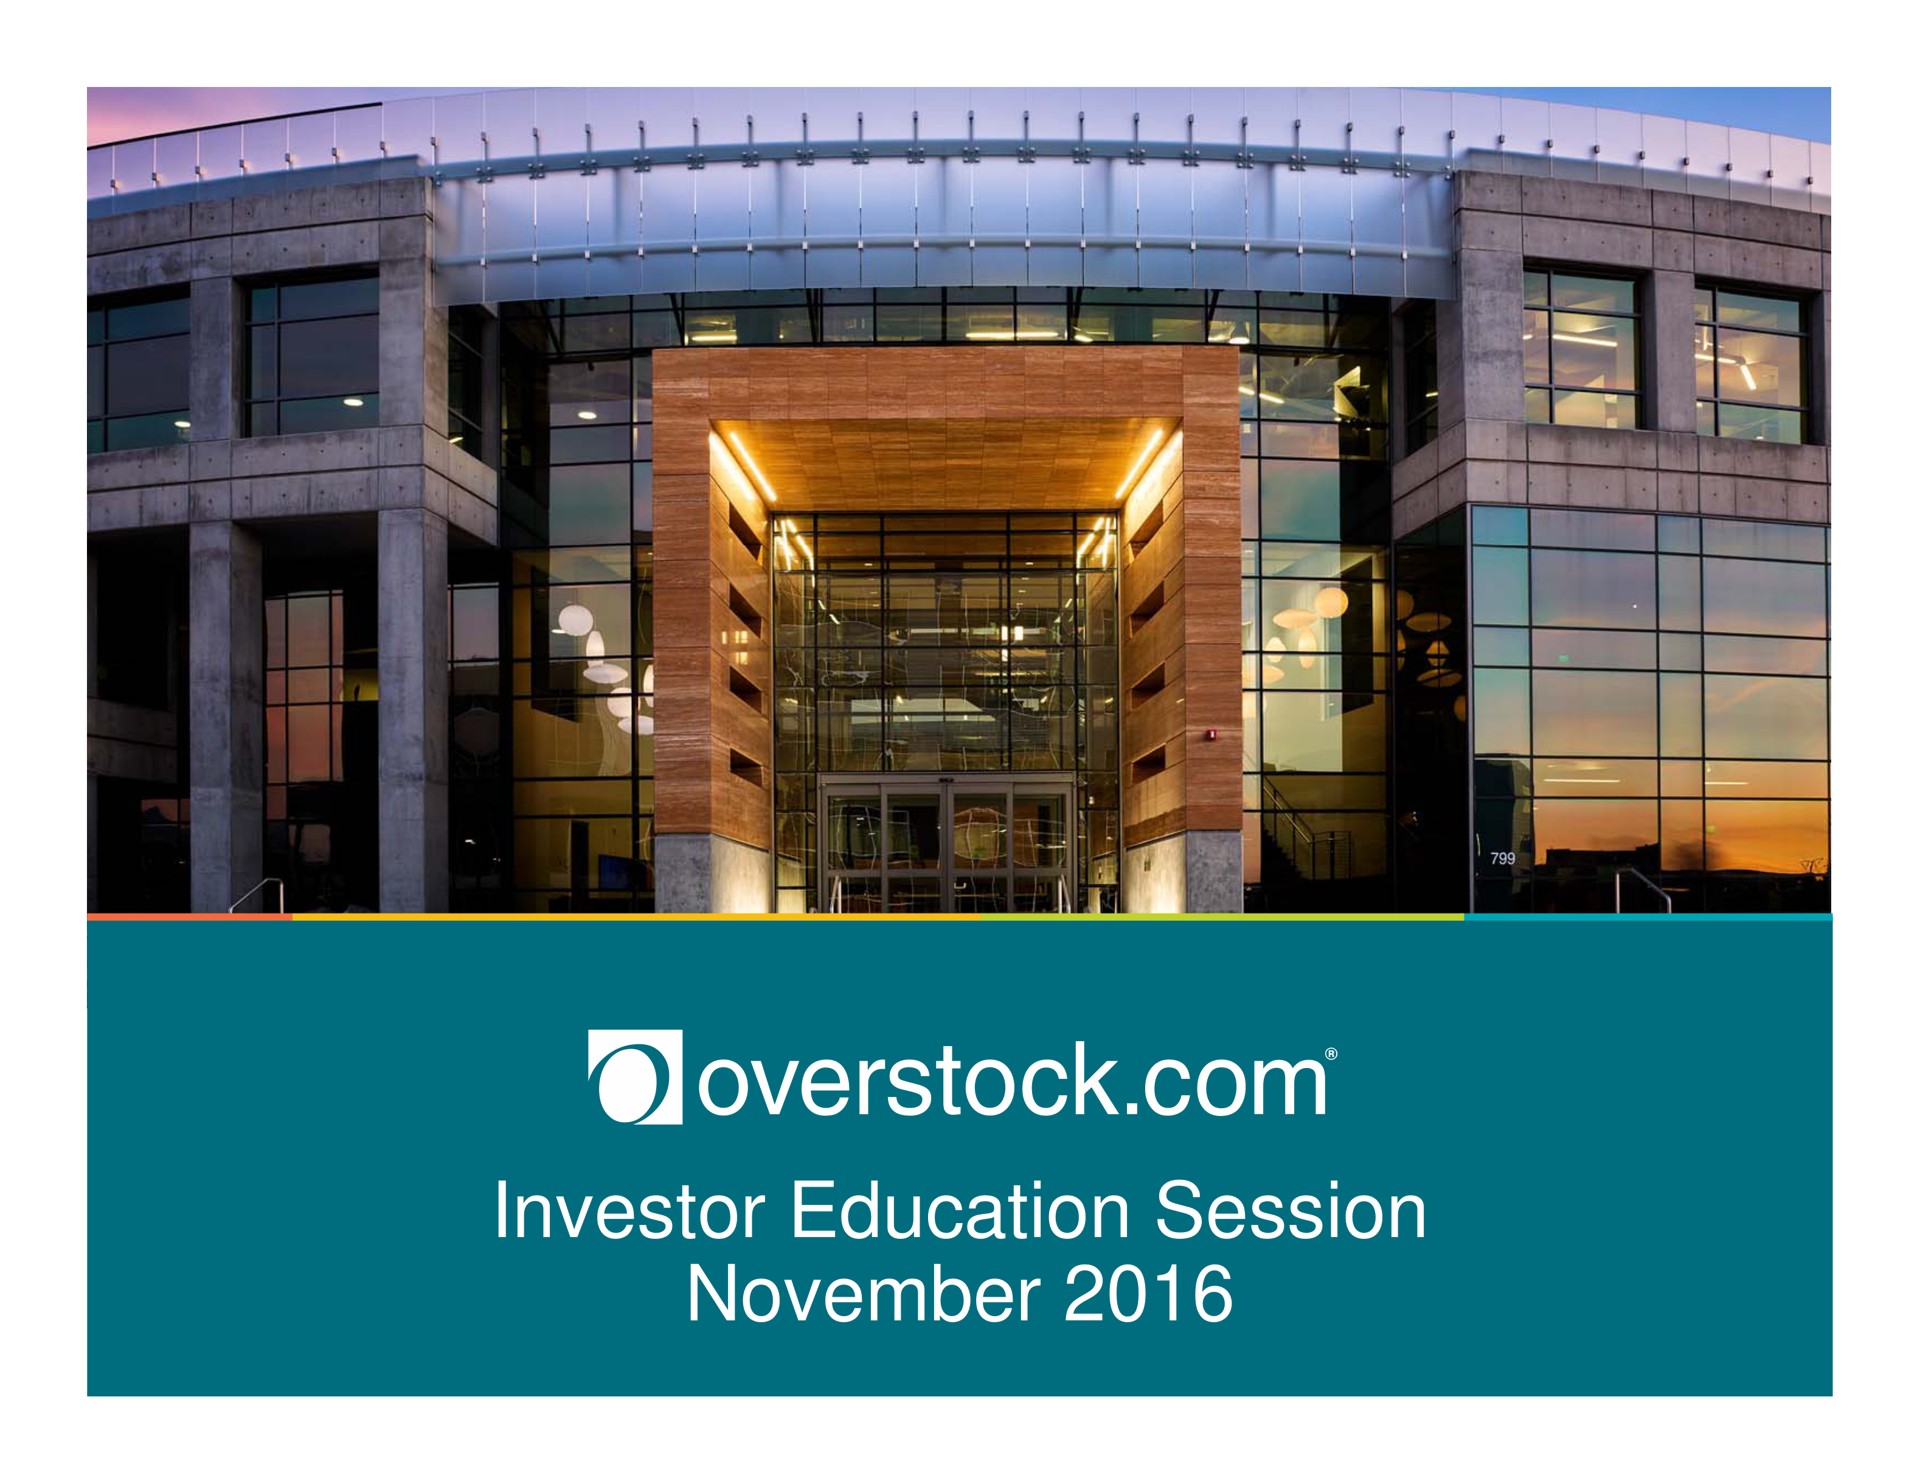 investor education session overstock | Overstock